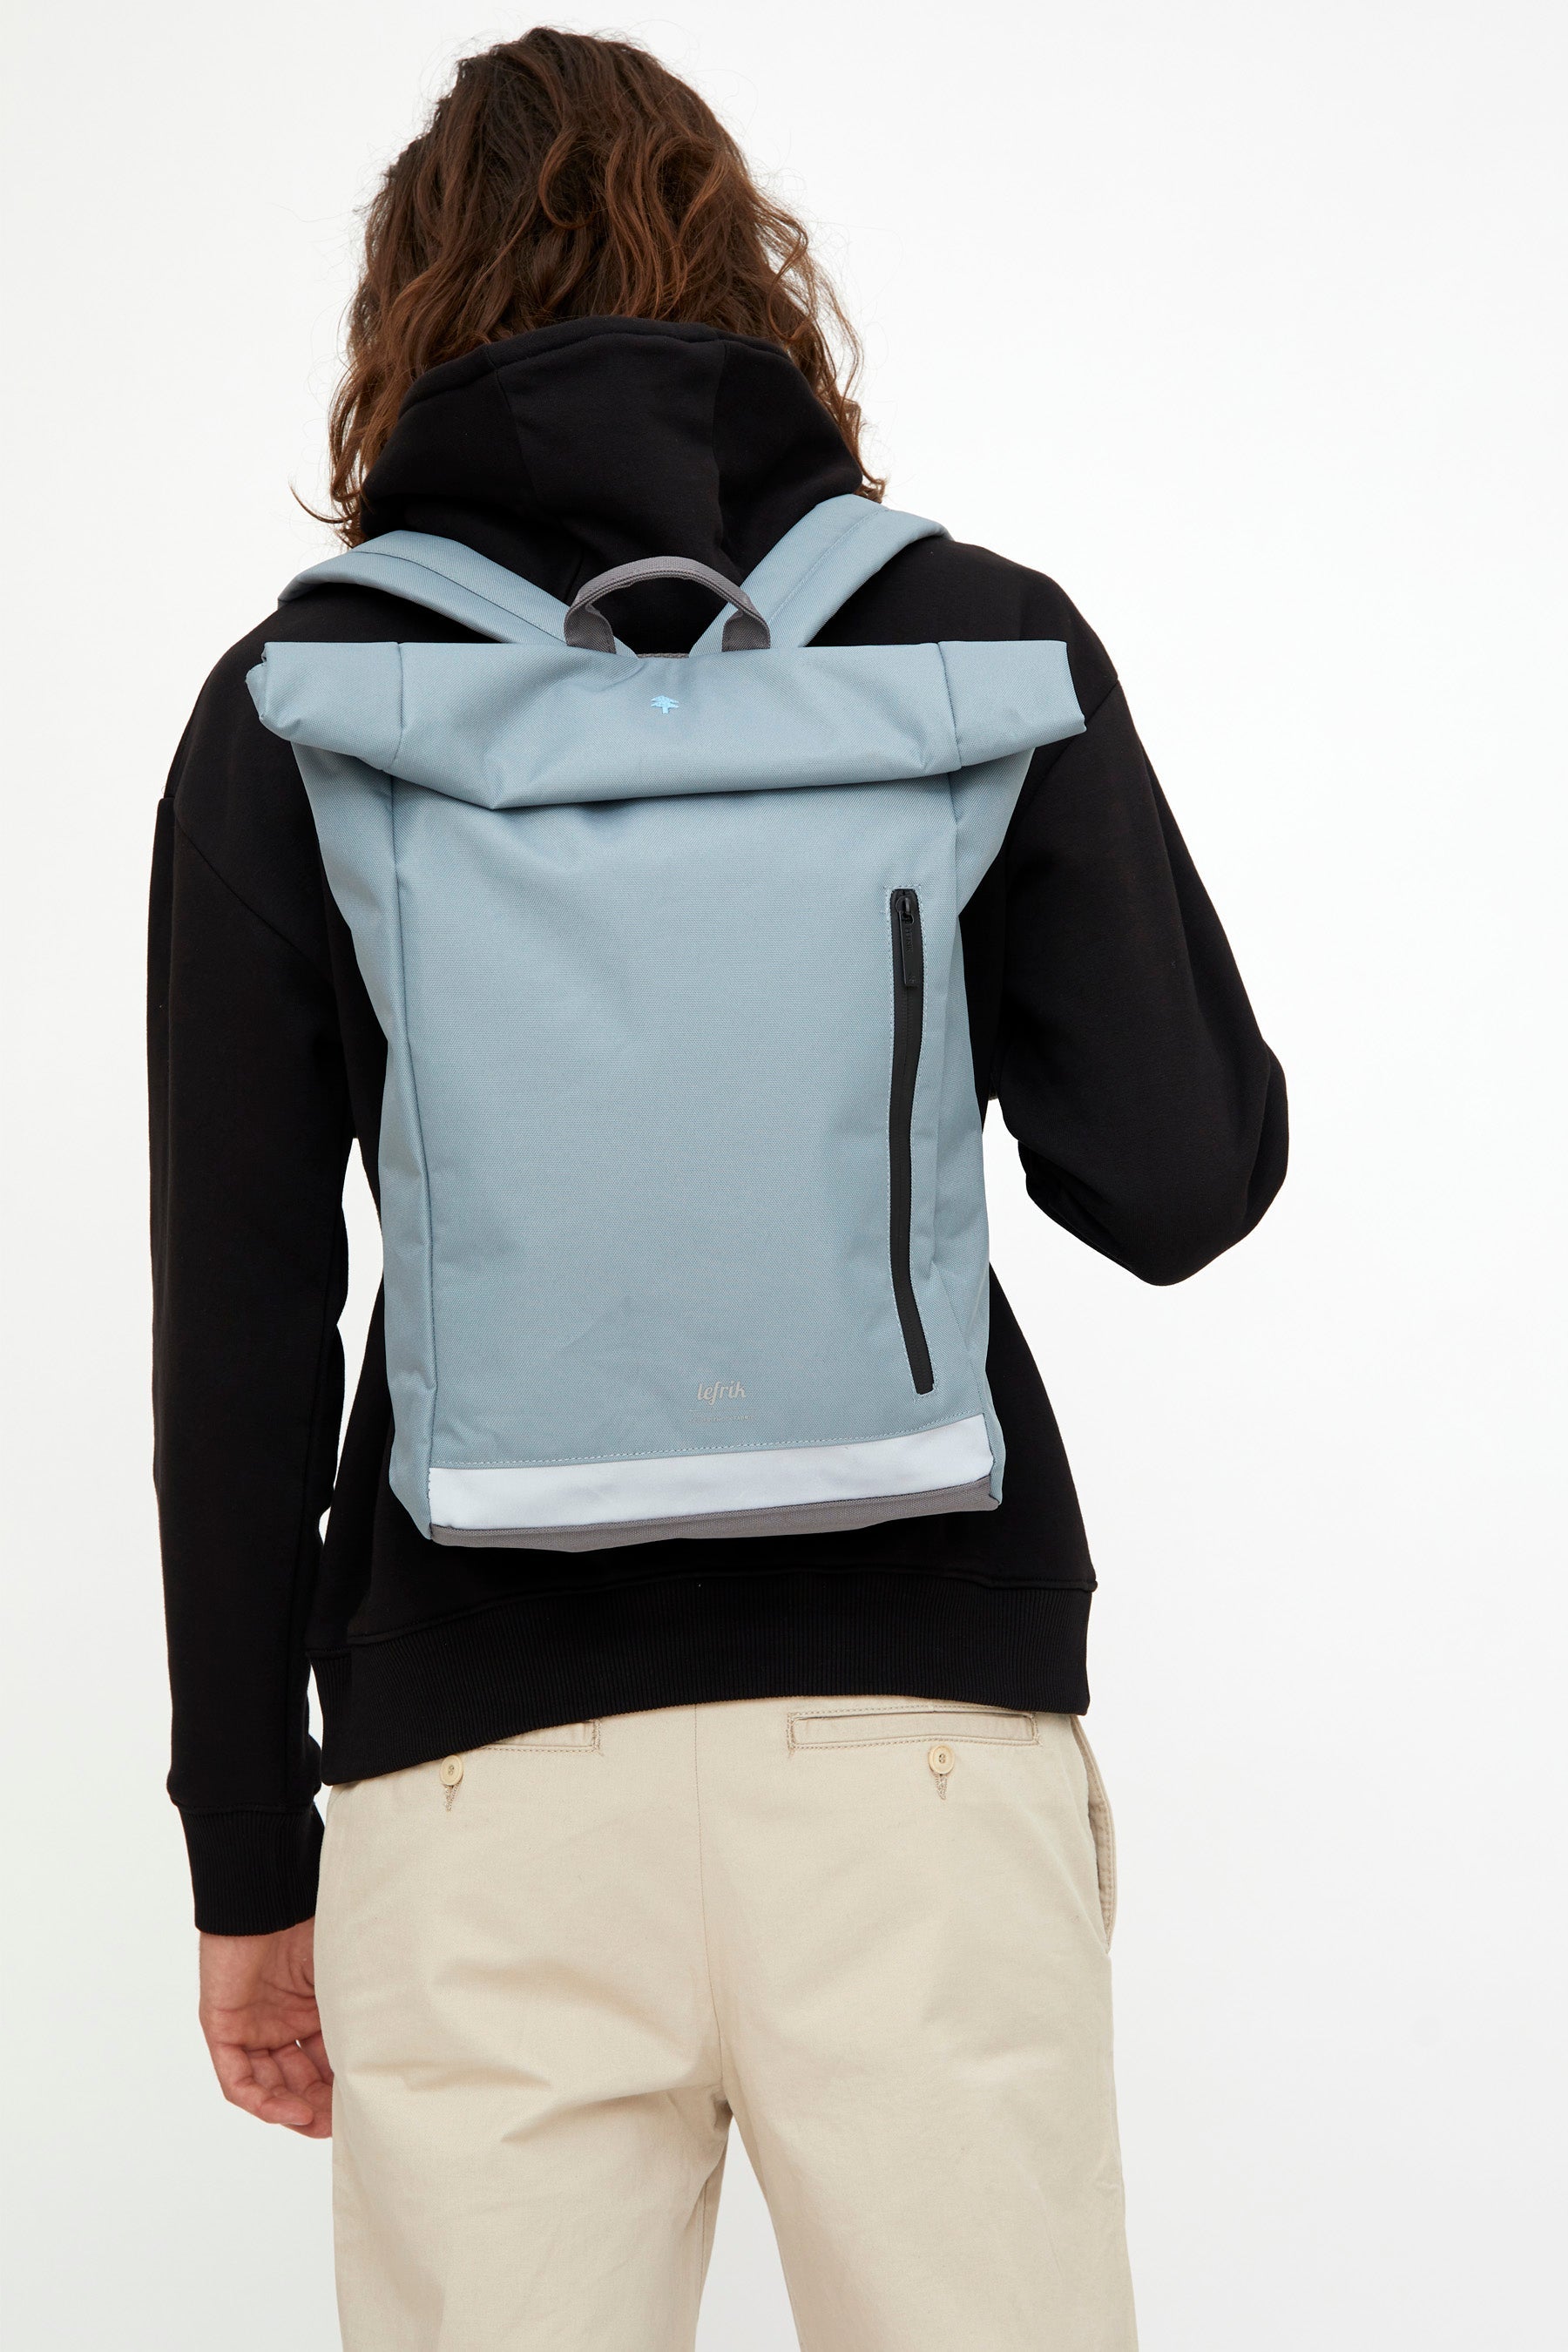 Light blue Roll Reflective backpack (19l) made from recycled PET plastic bottles from Lefrik